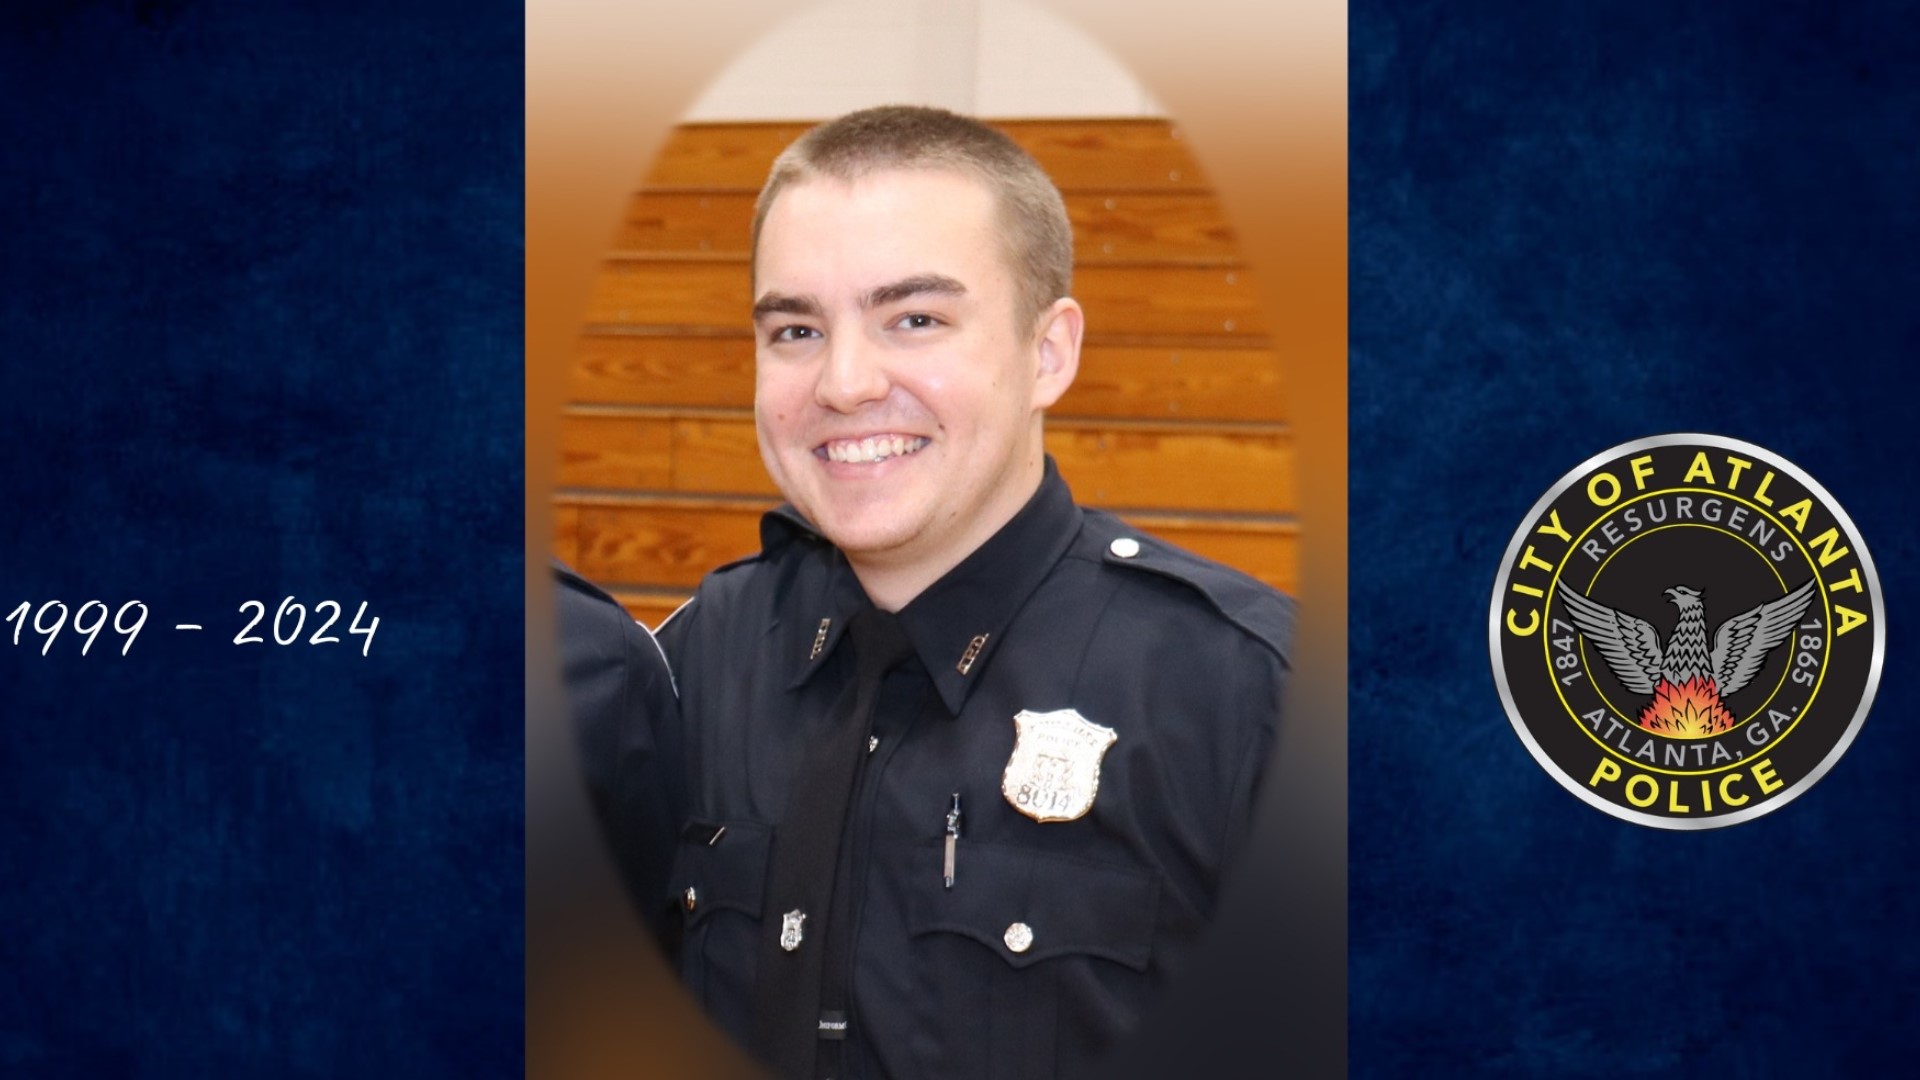 Officer Lucas Sizemore passed away on Jan. 9 after recently graduating from the police academy back in May.